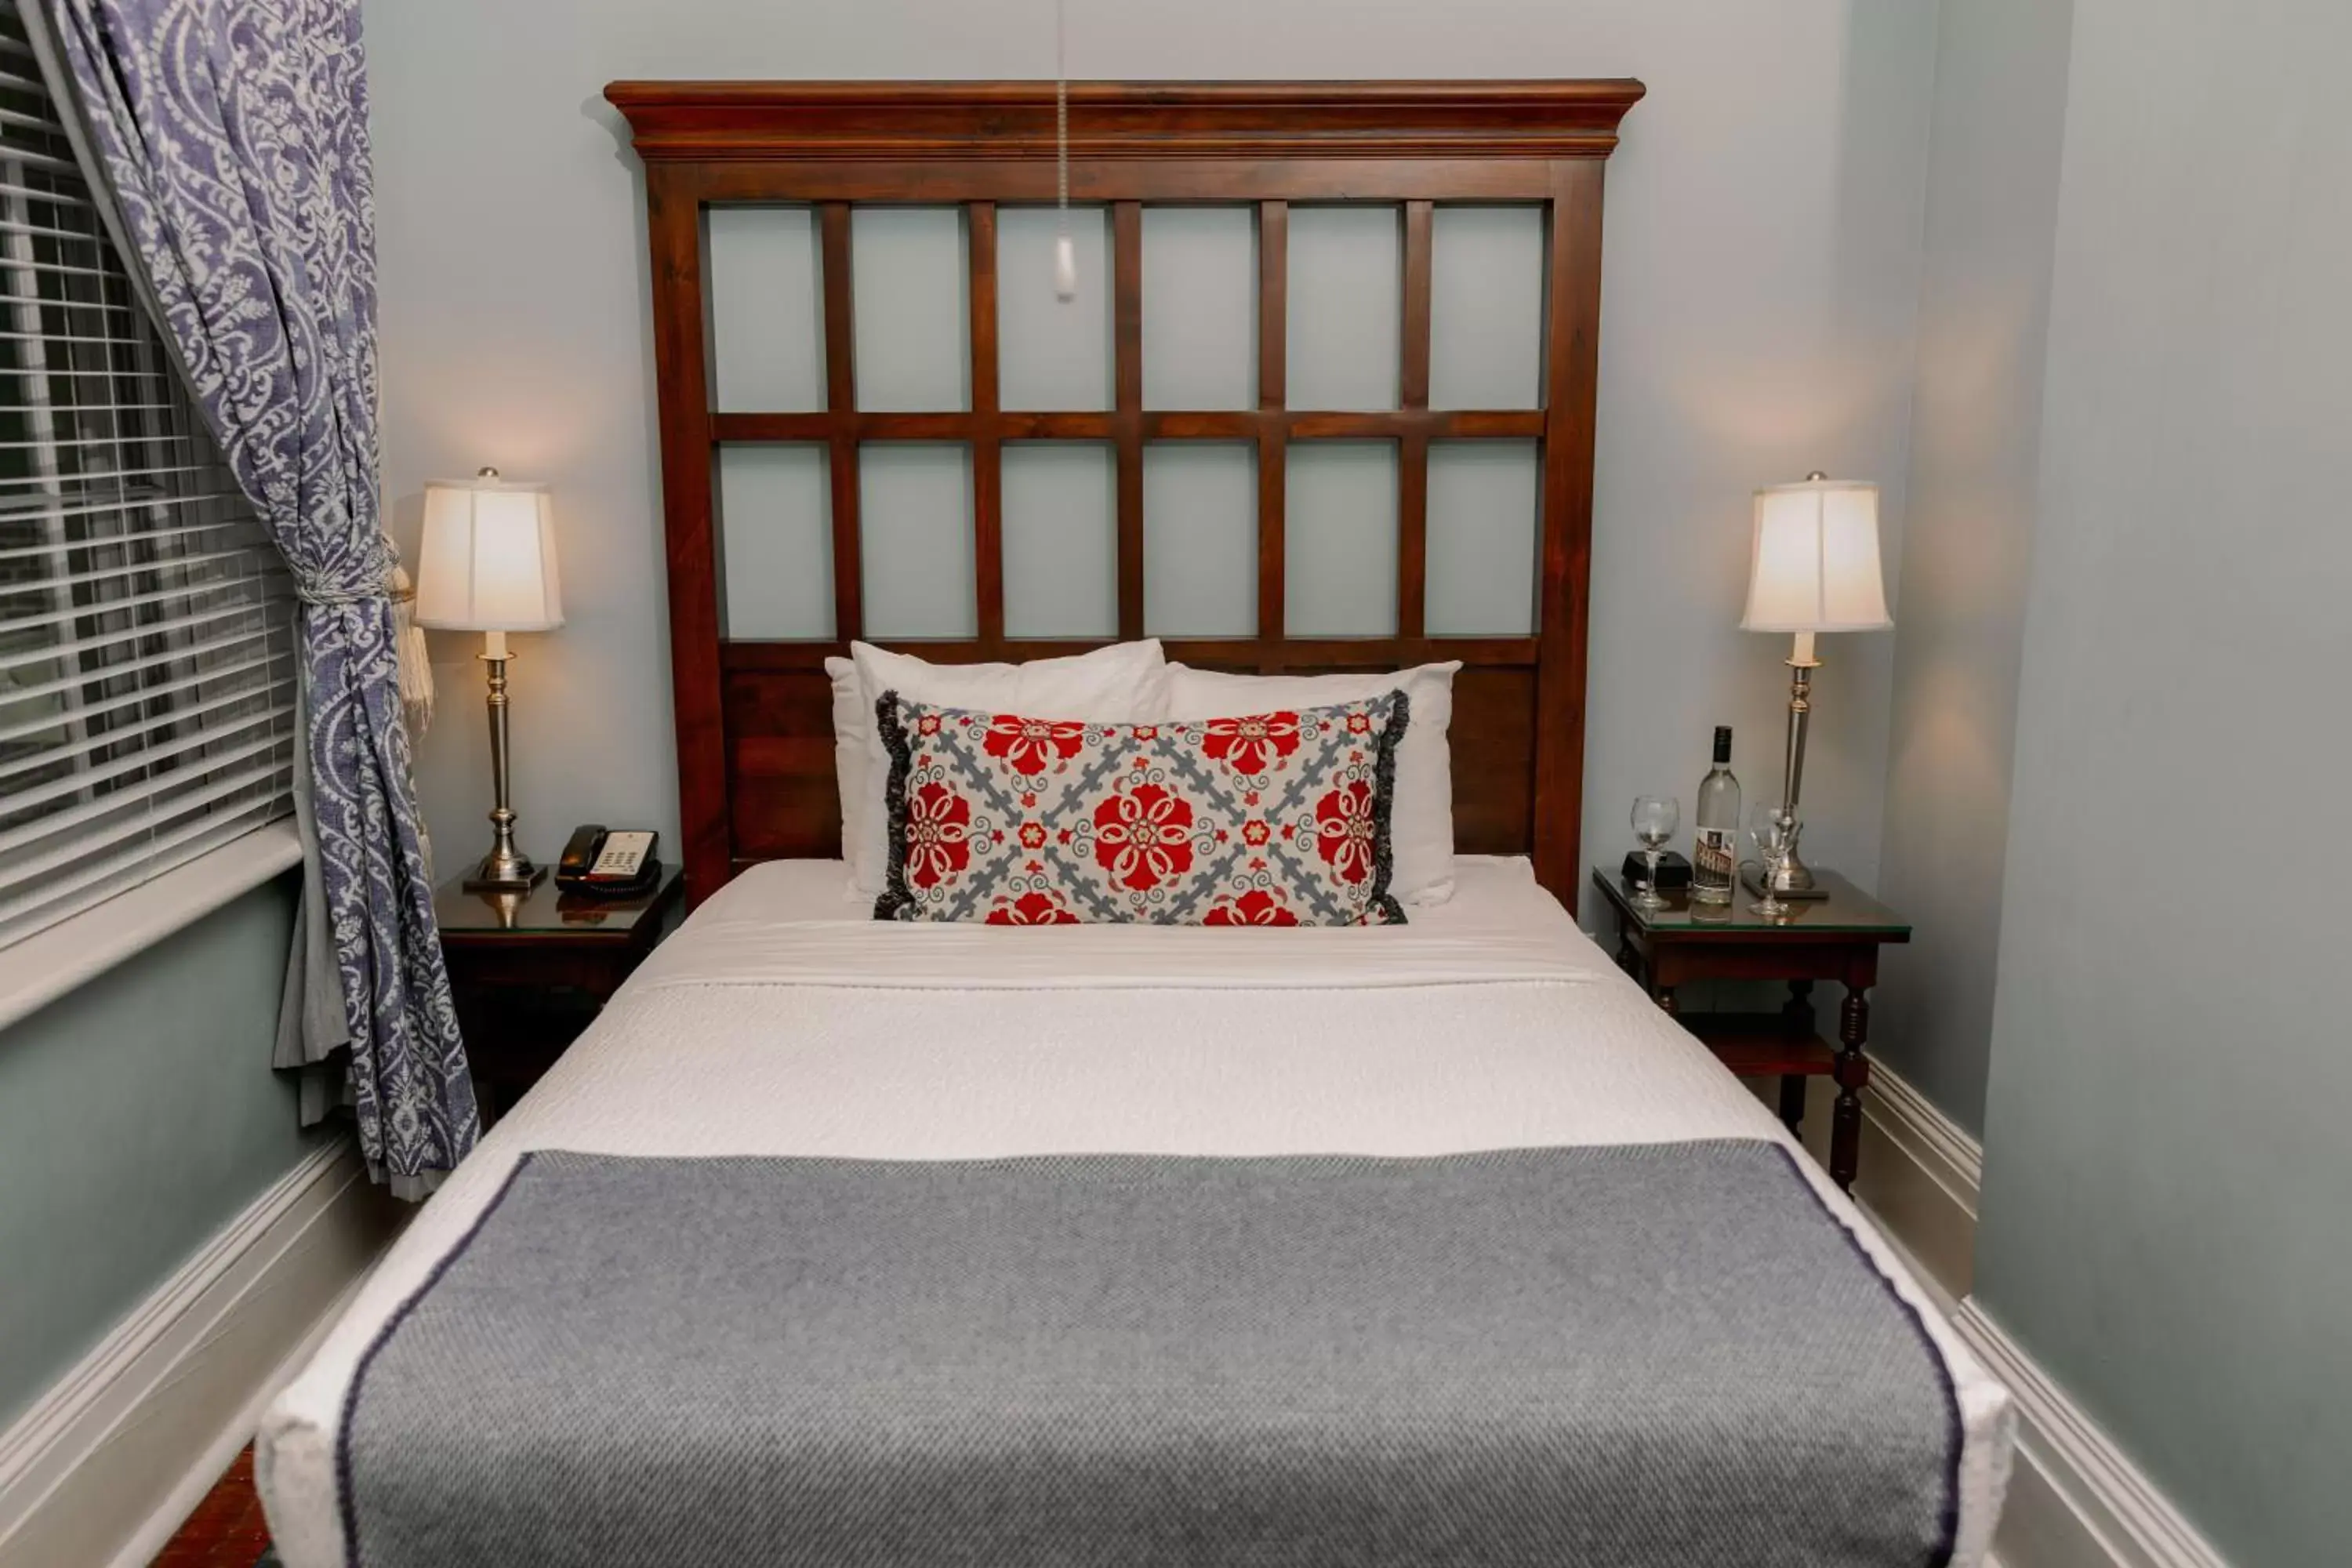 Petite Queen Room in The Marshall House, Historic Inns of Savannah Collection